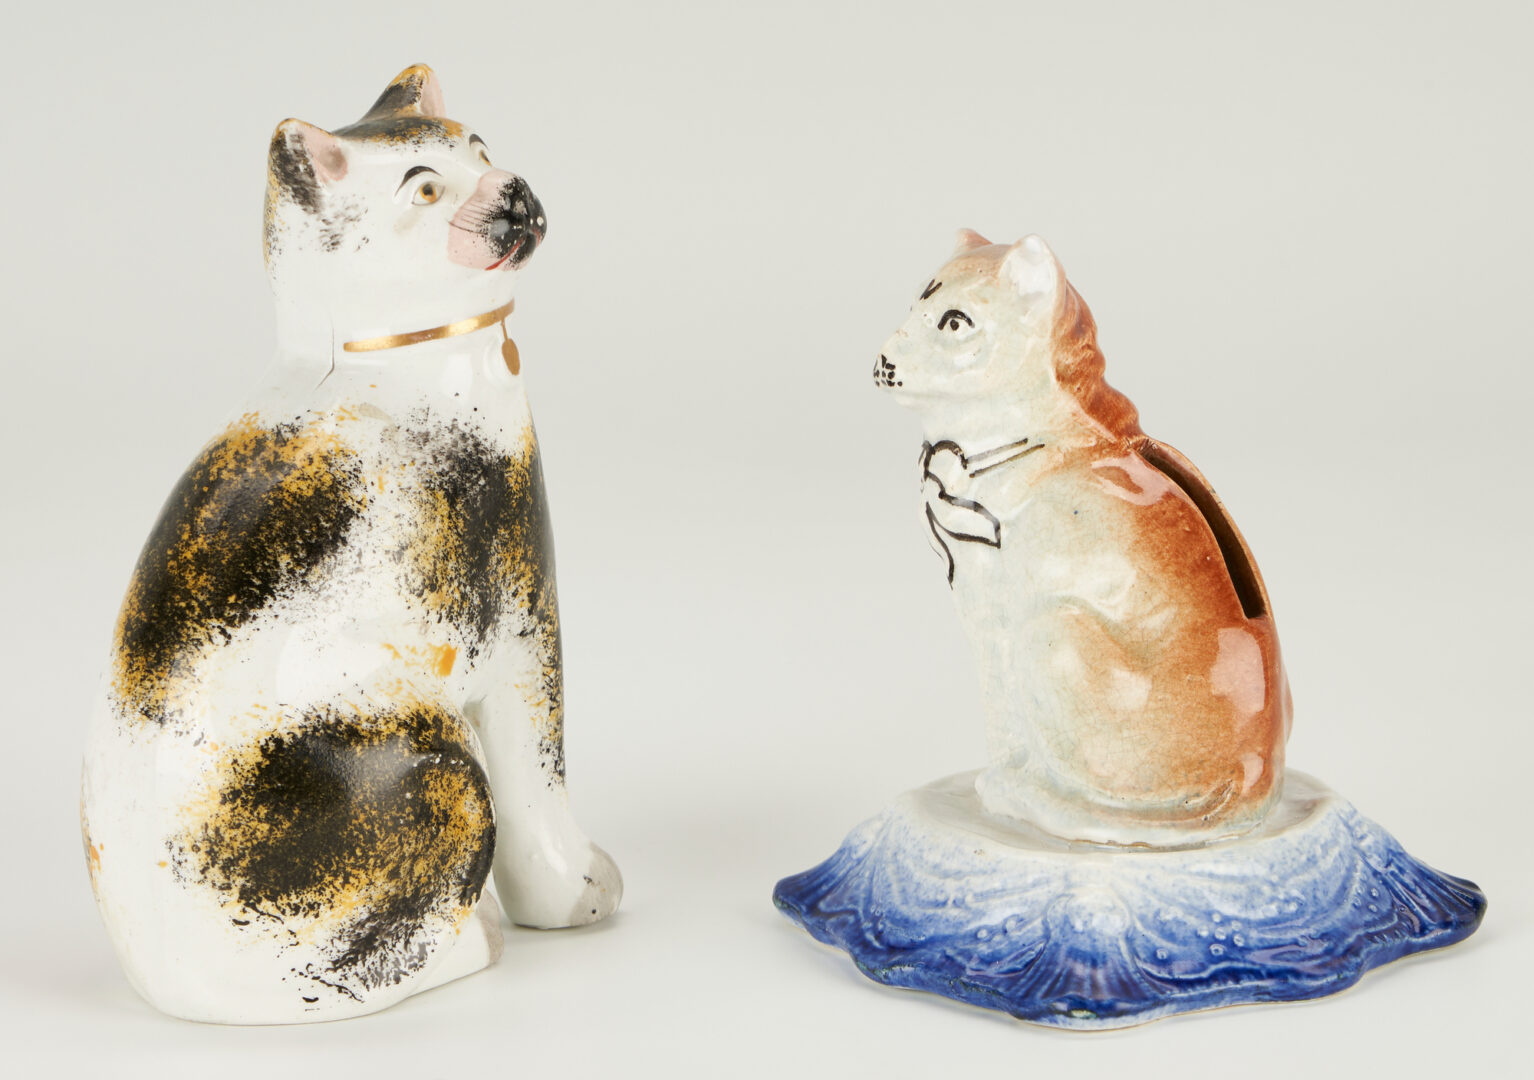 Lot 926: 4 Pearlware & Staffordshire Figures, incl. Cat, Bank, Toby Lamp Lighter